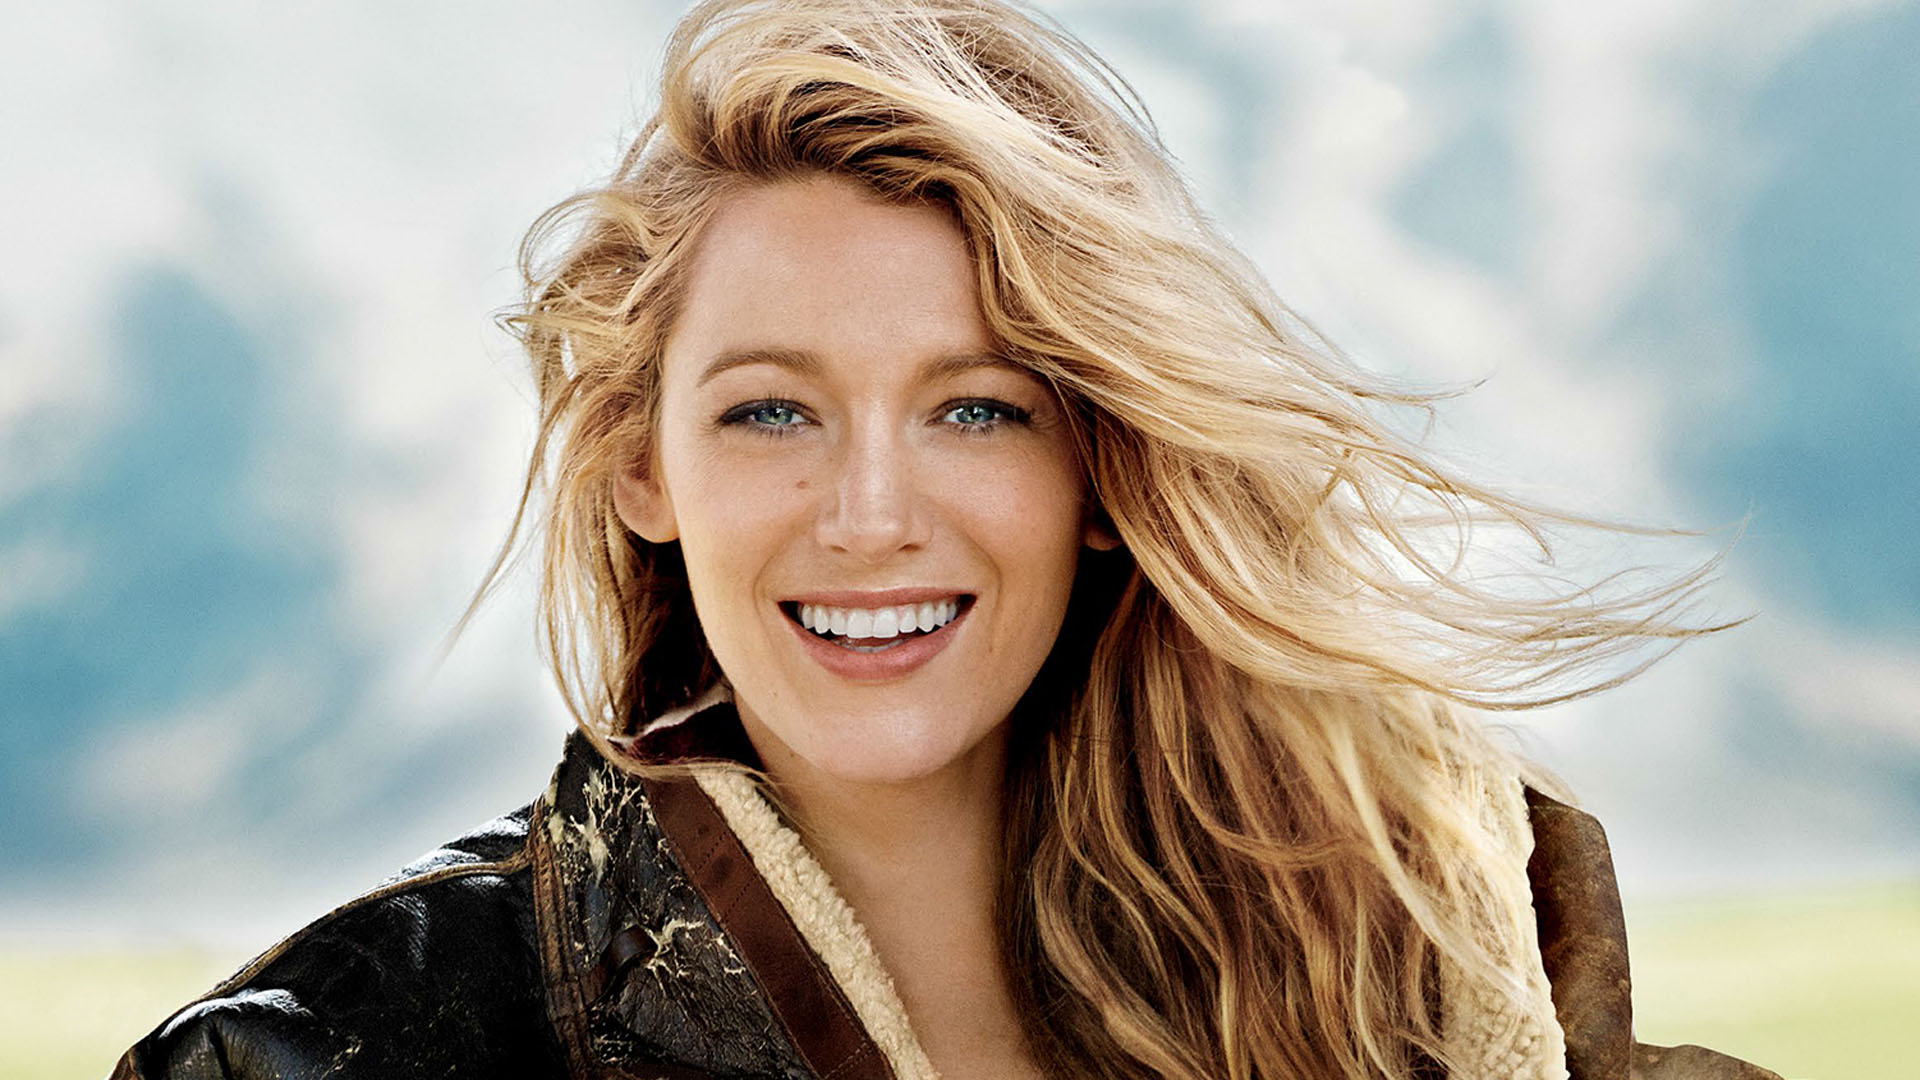 Blake Lively Wallpapers - Blake Lively , HD Wallpaper & Backgrounds